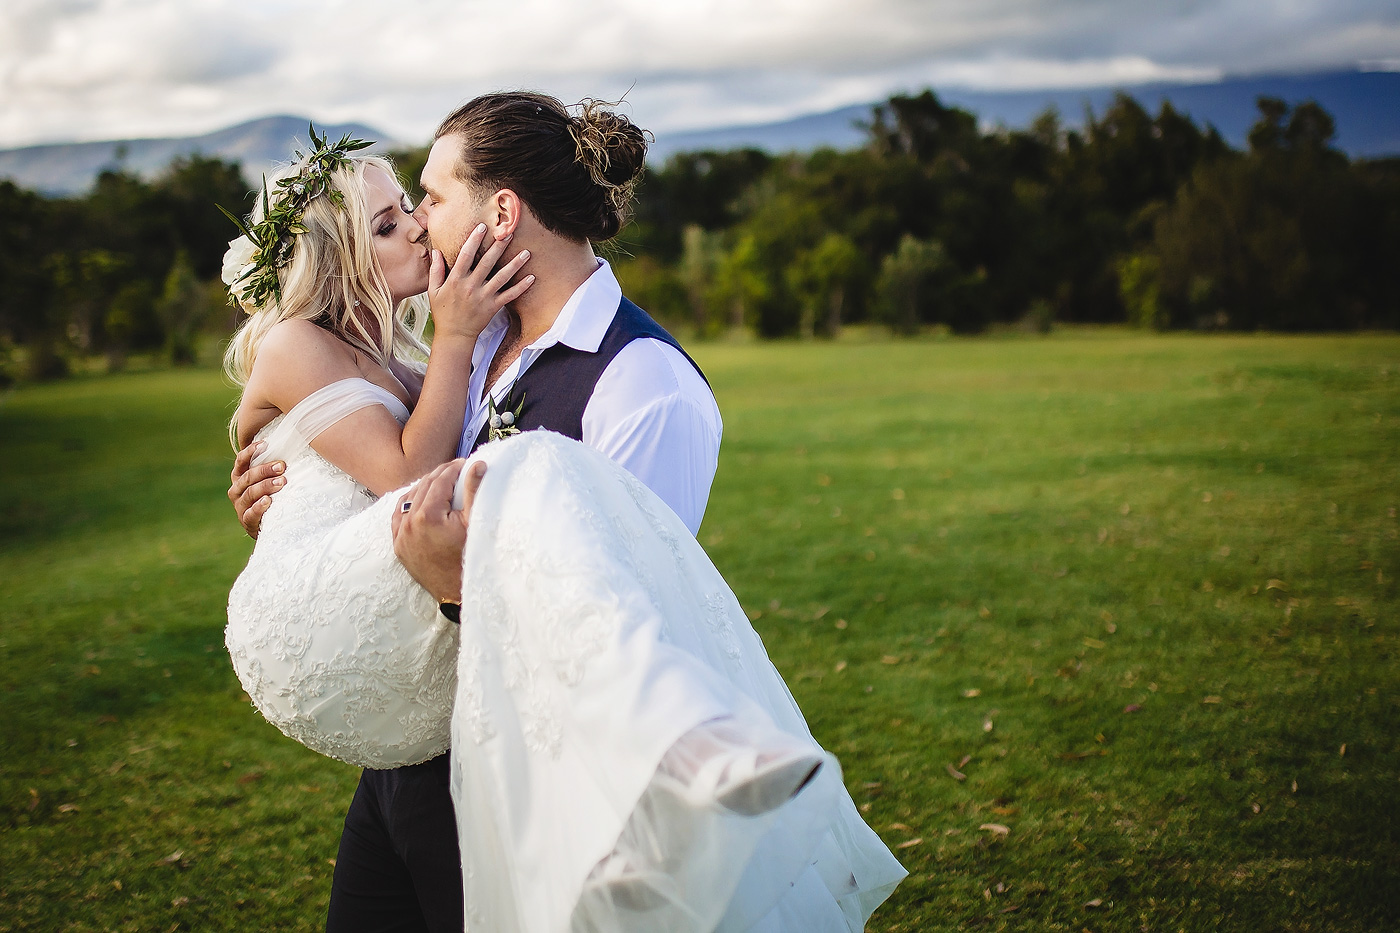 Groom carrying his bride and kiss during wedding portrait shoot